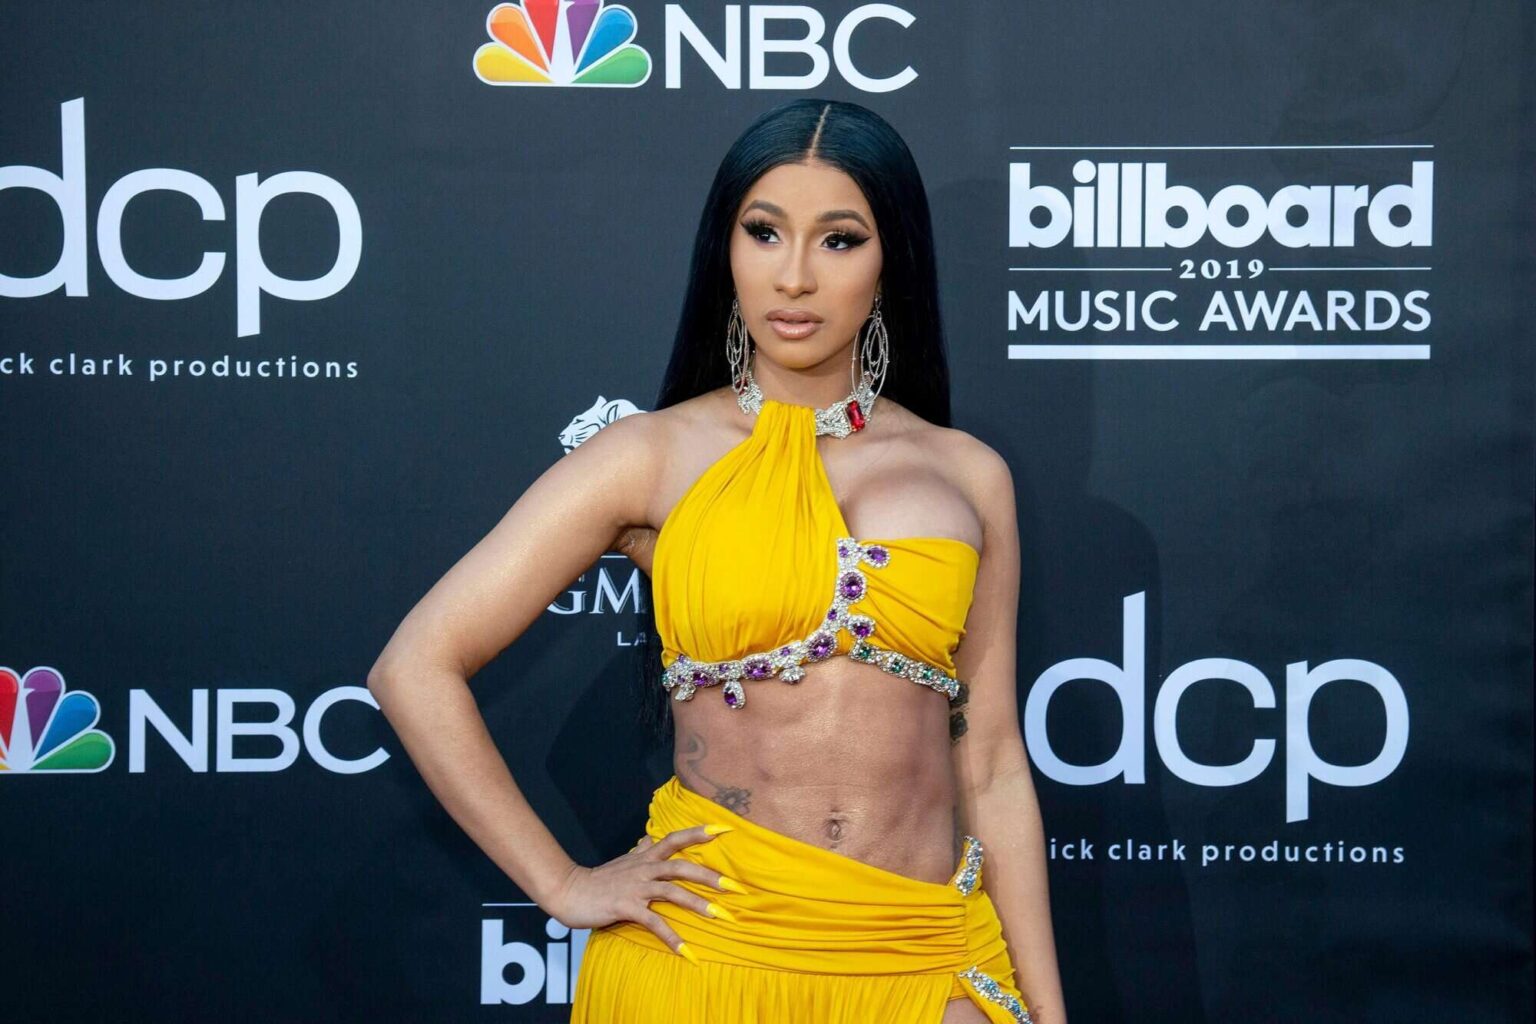 Will Cardi B go to jail after fighting over her husband at a strip club? Check out the latest news about Cardi's trial.